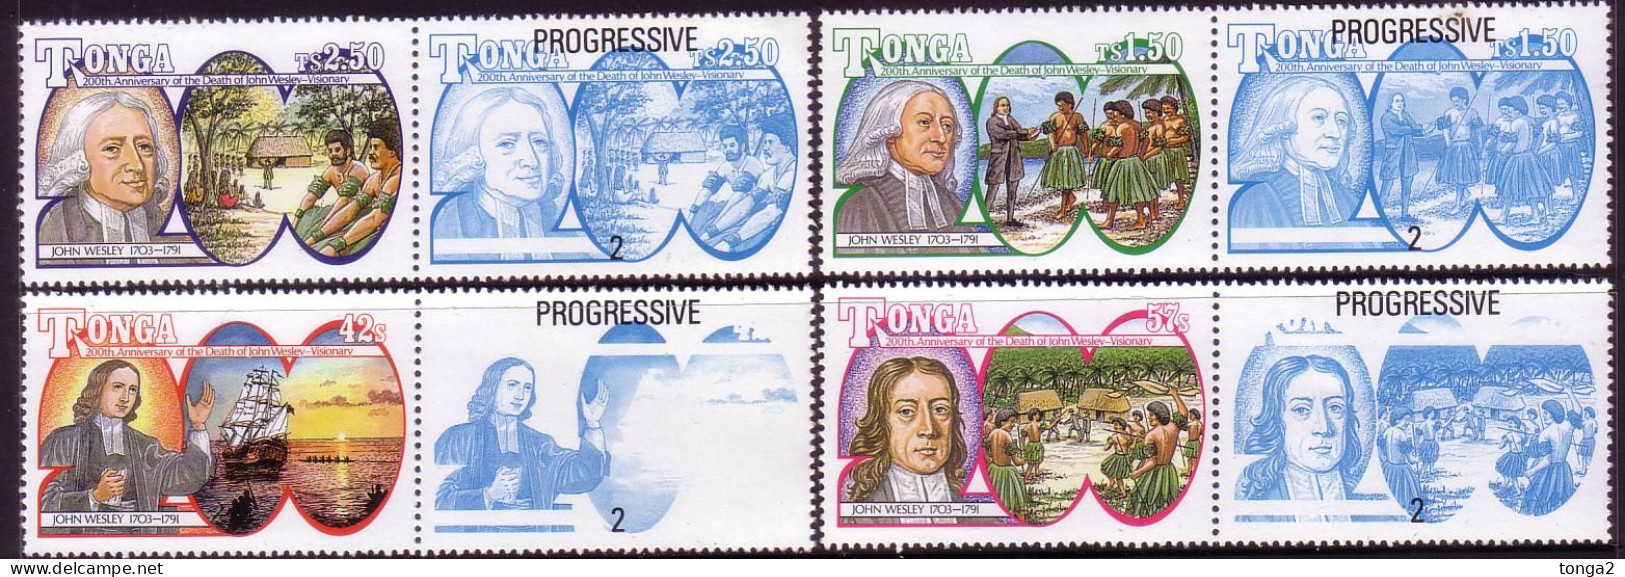 Tonga 1991 UNISSUED Wesley Missionary MNH Set With Progressive Colours - See Description For More Details - Tonga (1970-...)